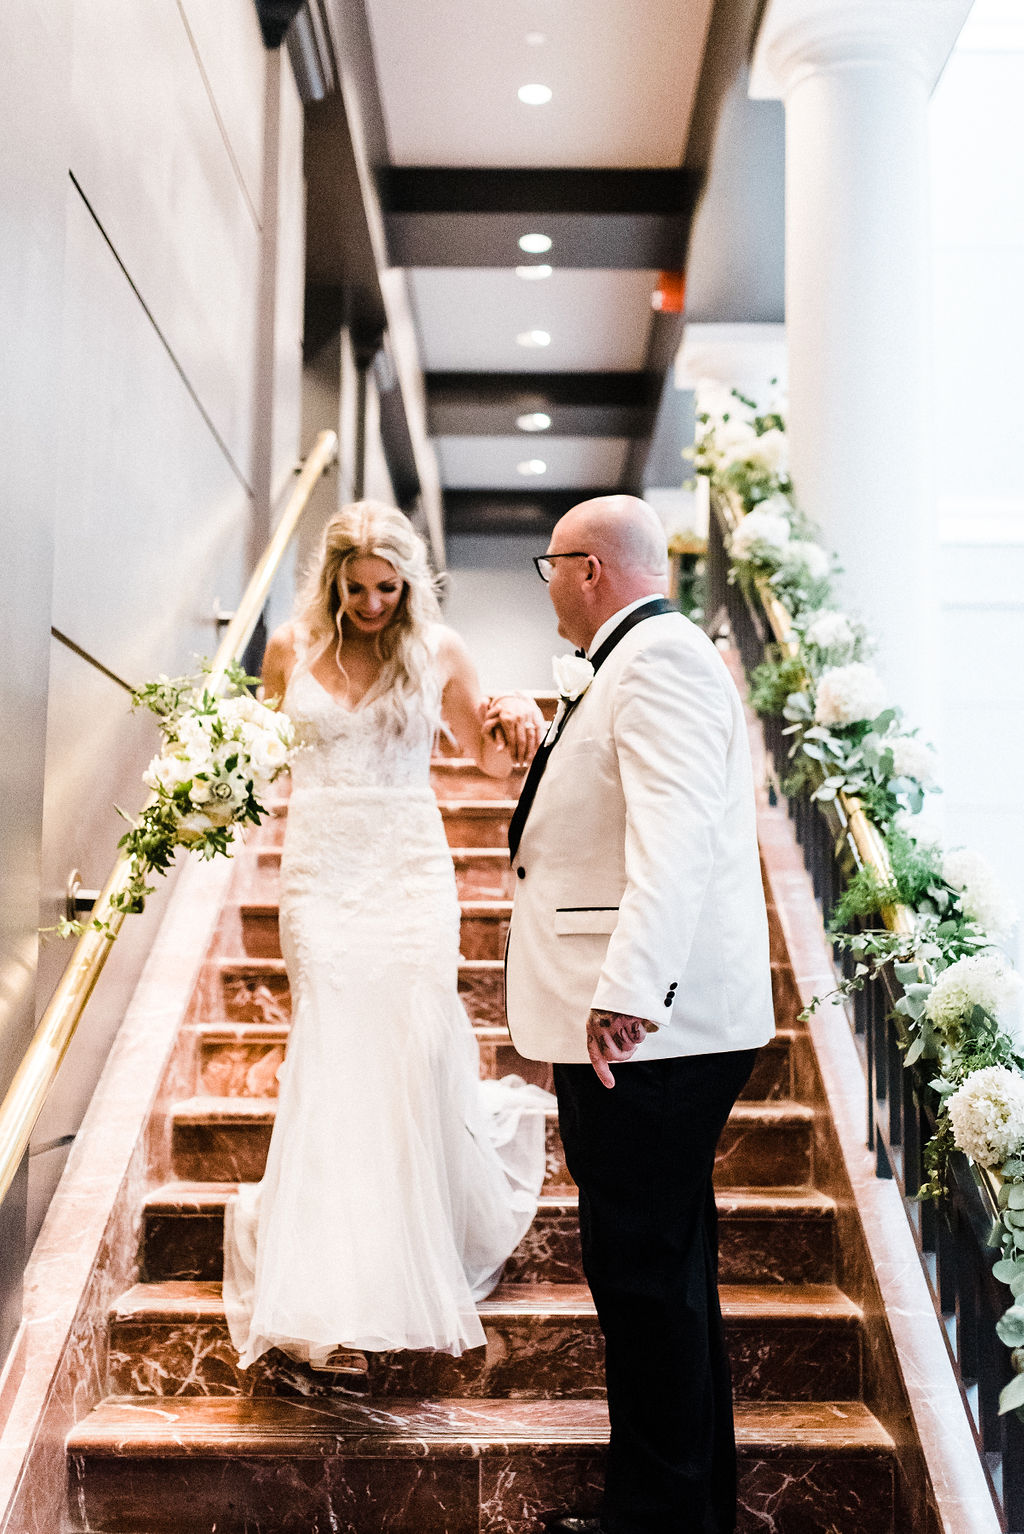 The Goodwin Hotel Wedding in Hartford, CT | Melanie & Tyler Anderson - Pearl Weddings & Events